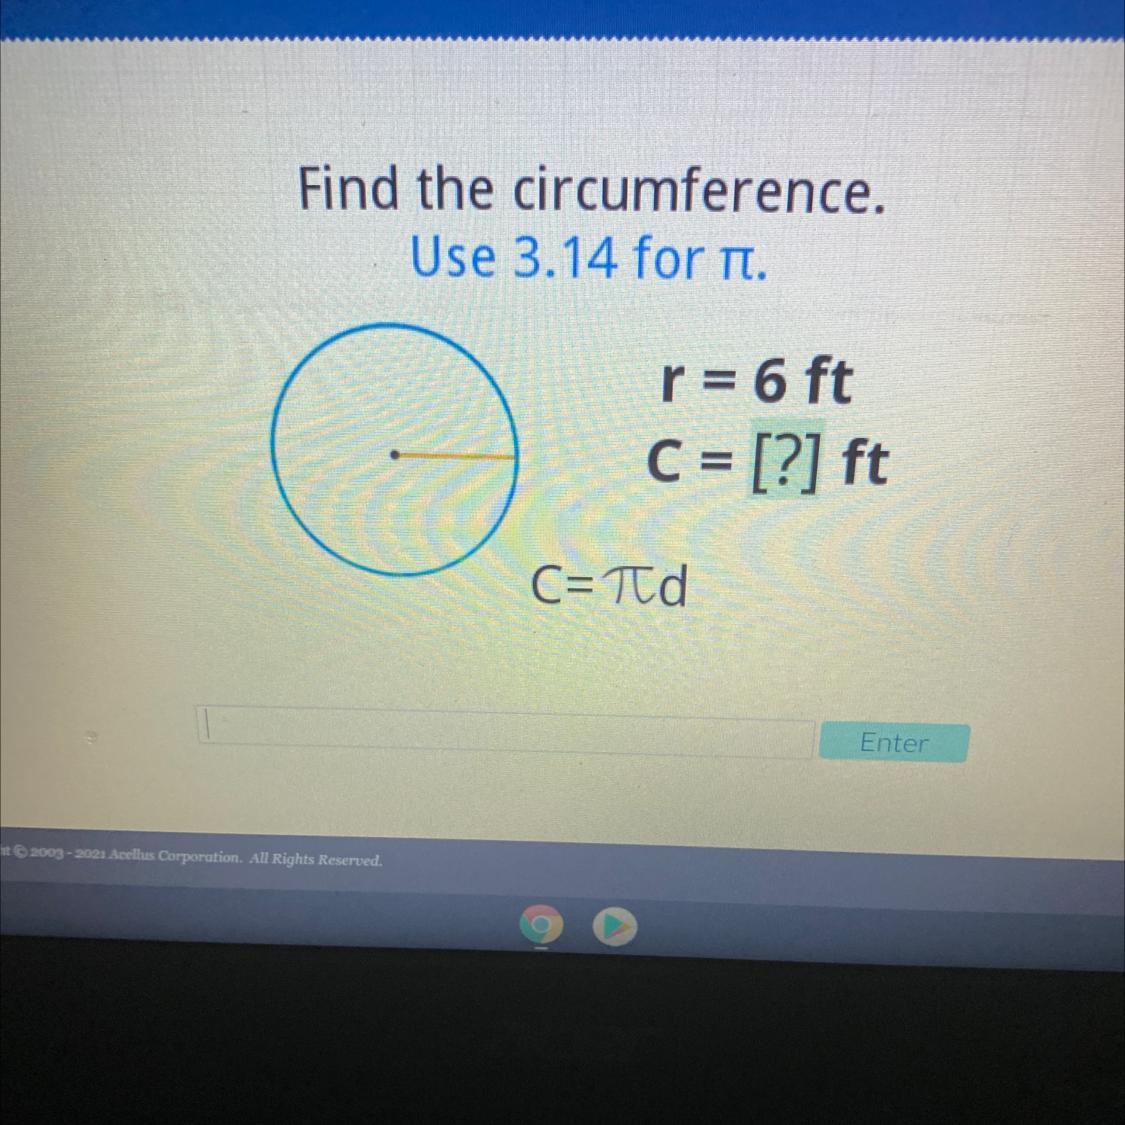 Find The Circumference.Use 3.14 For T.-r = 6 FtC = [?] FtC=rd